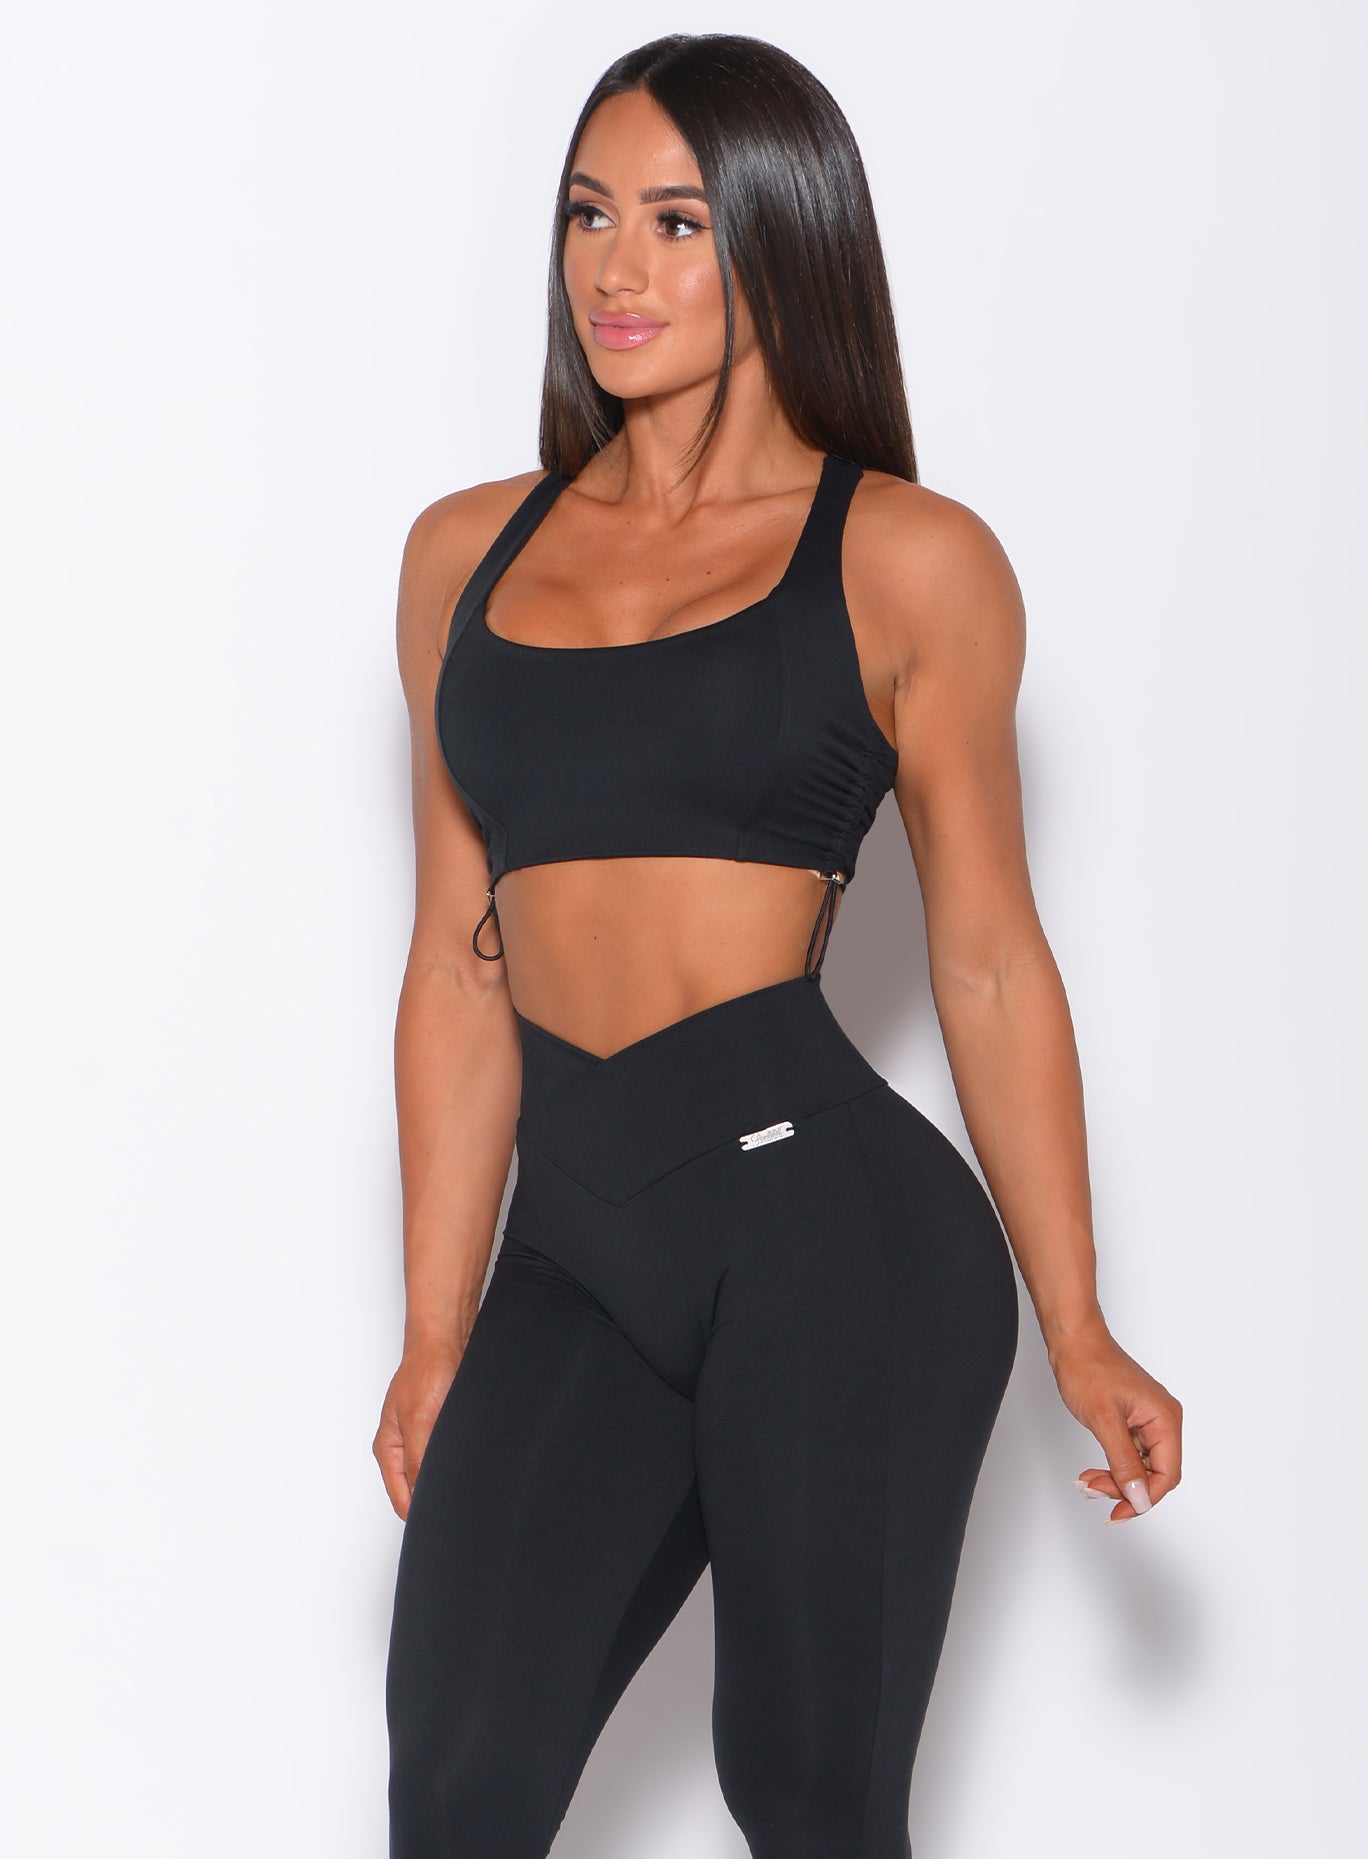 Front profile view of a model in our black toggle sports bra and a matching mid rise leggings